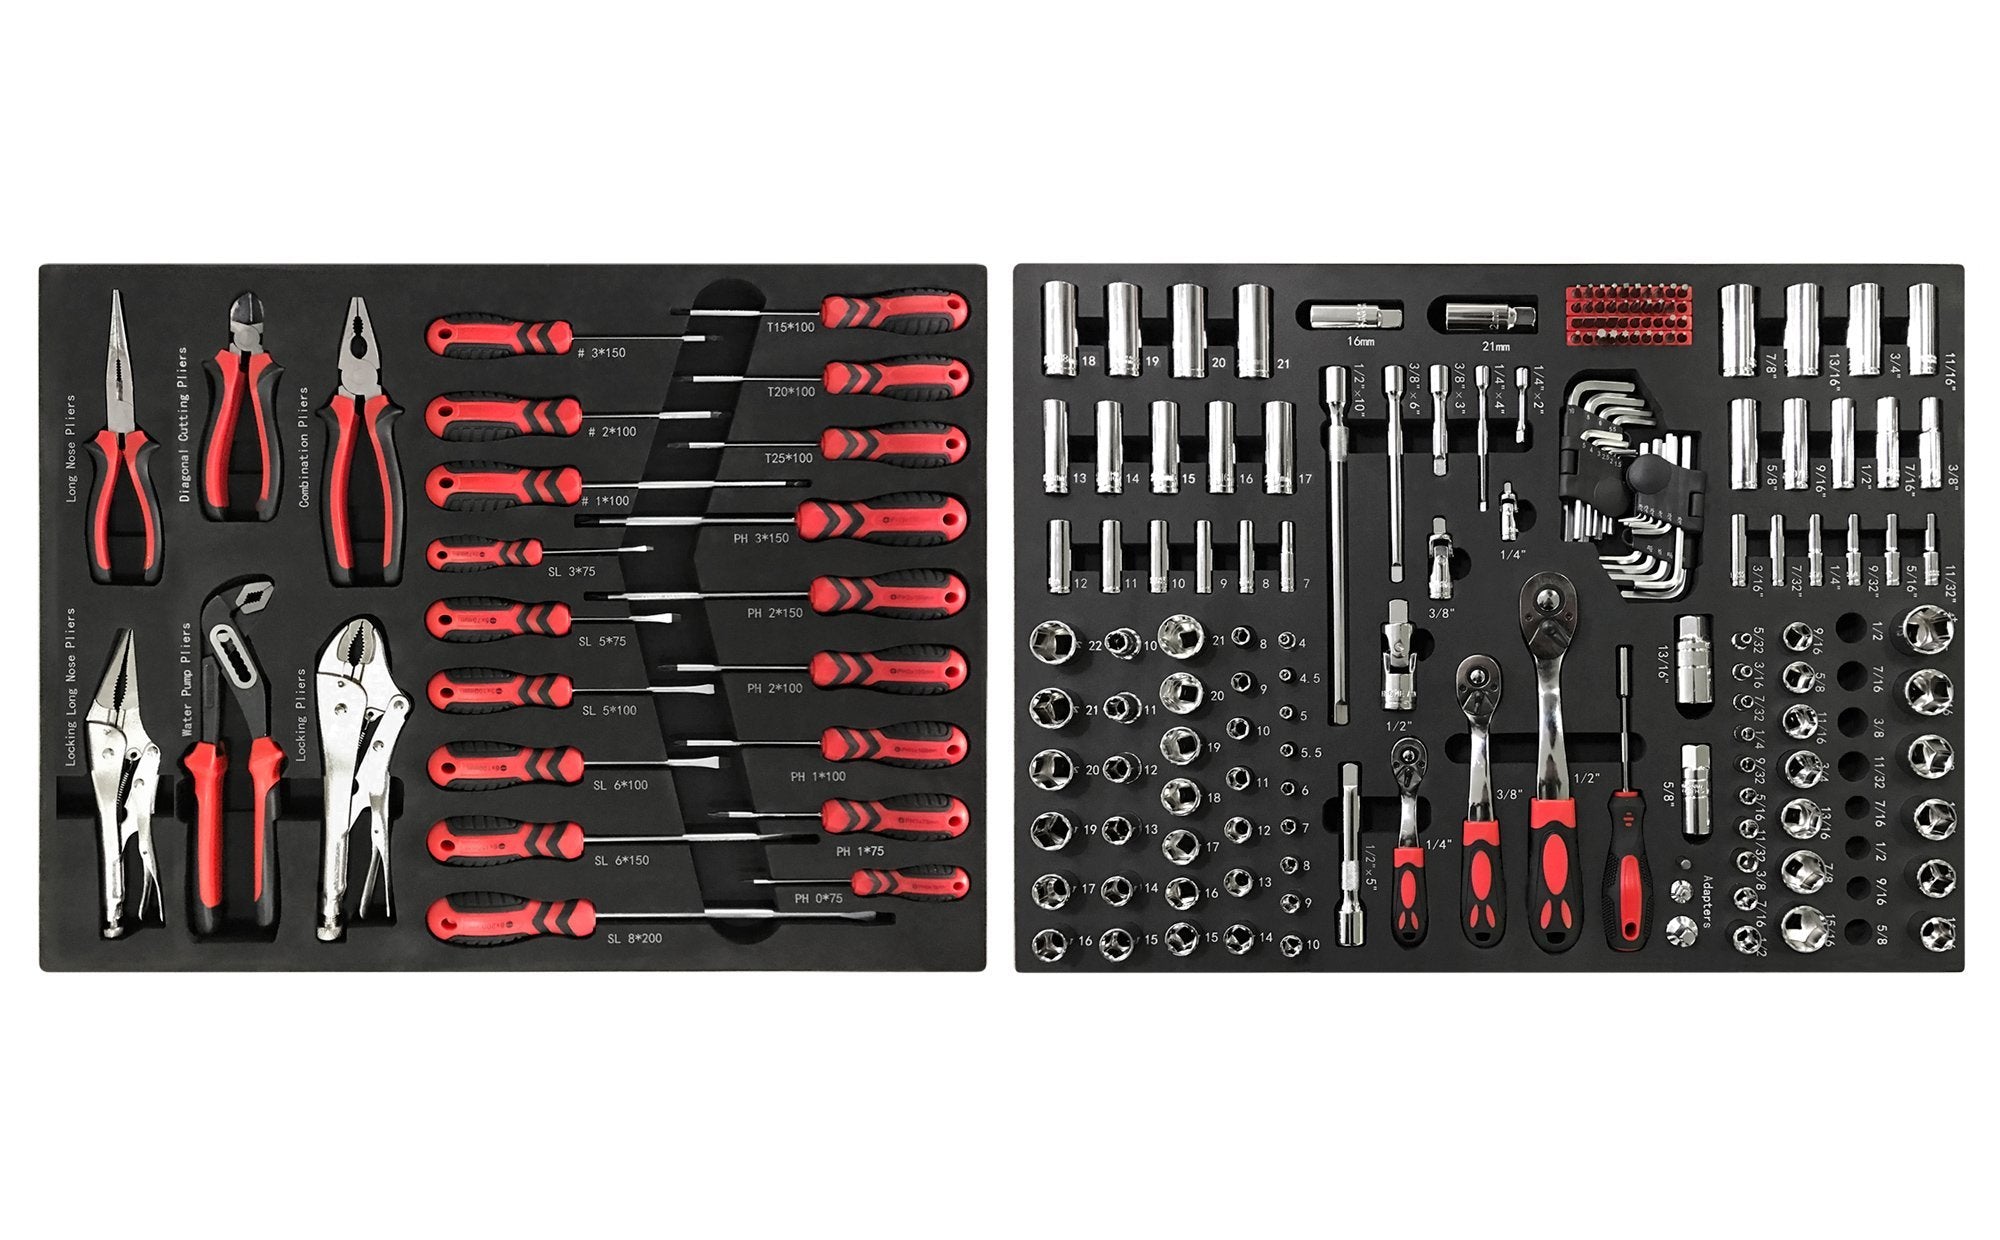 Pro Series Socket, Screwdriver and Plier Tray